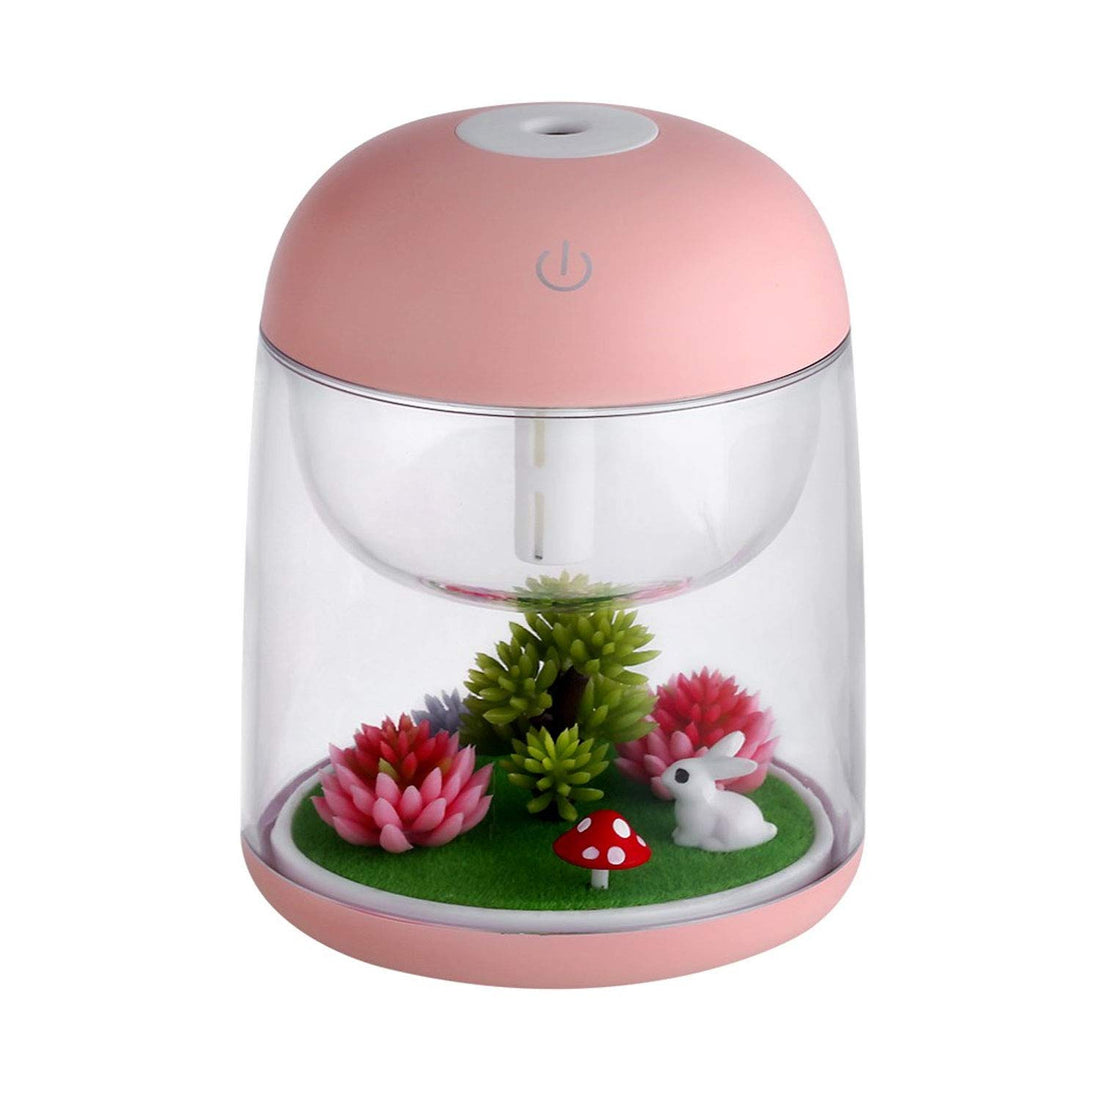 AEKAN Micro Landscape Humidifier with Changing Led Light,Adjustable Mist Mode, Waterless Auto Shut-Off,for Bedroom,Office,Car (Pink)